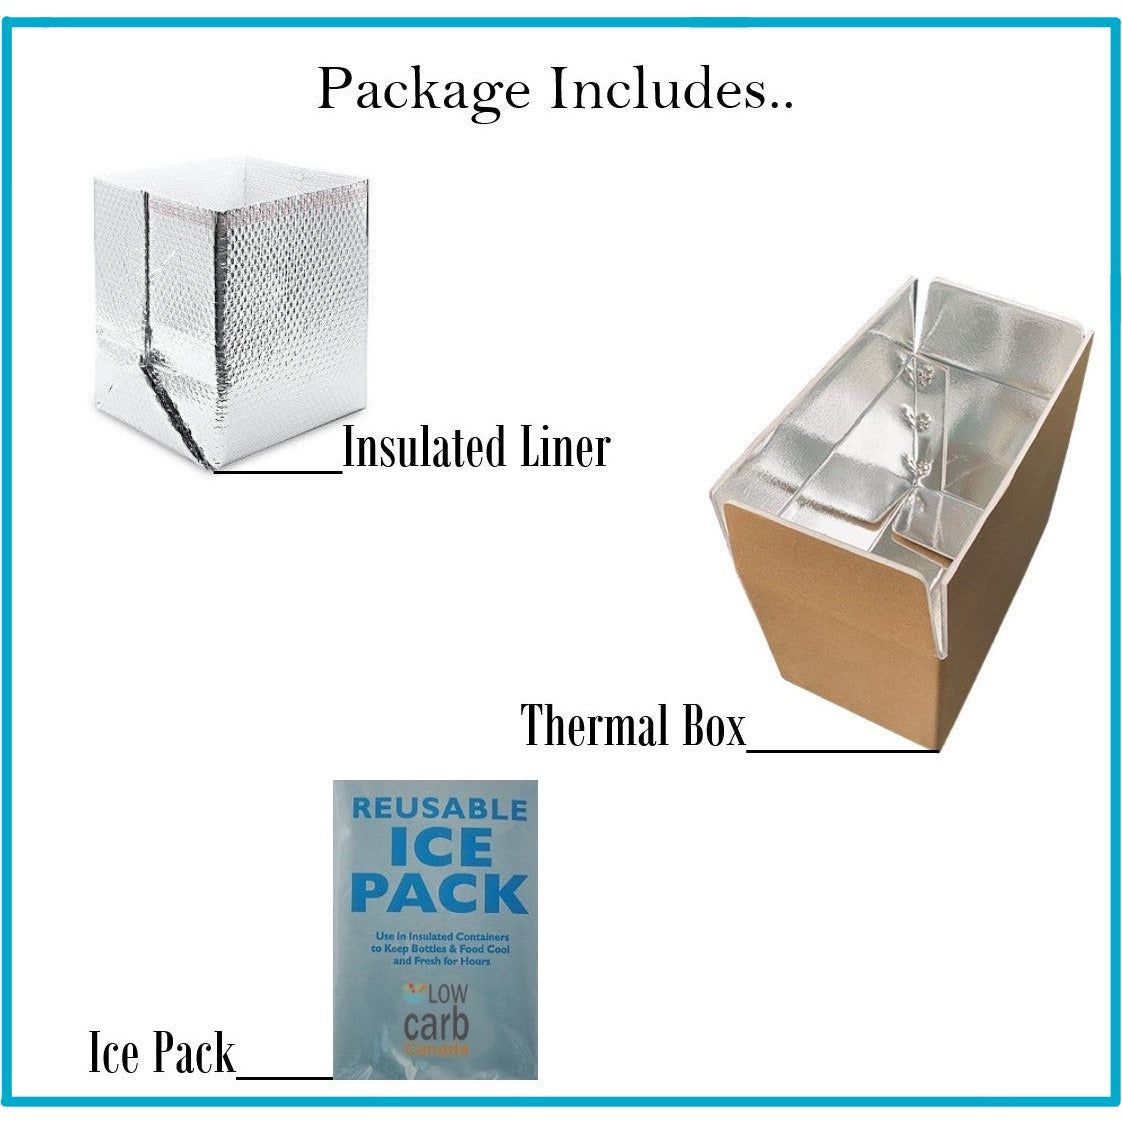 Thermal Package - Thermal Box, Insulated Liner, and Ice Pack